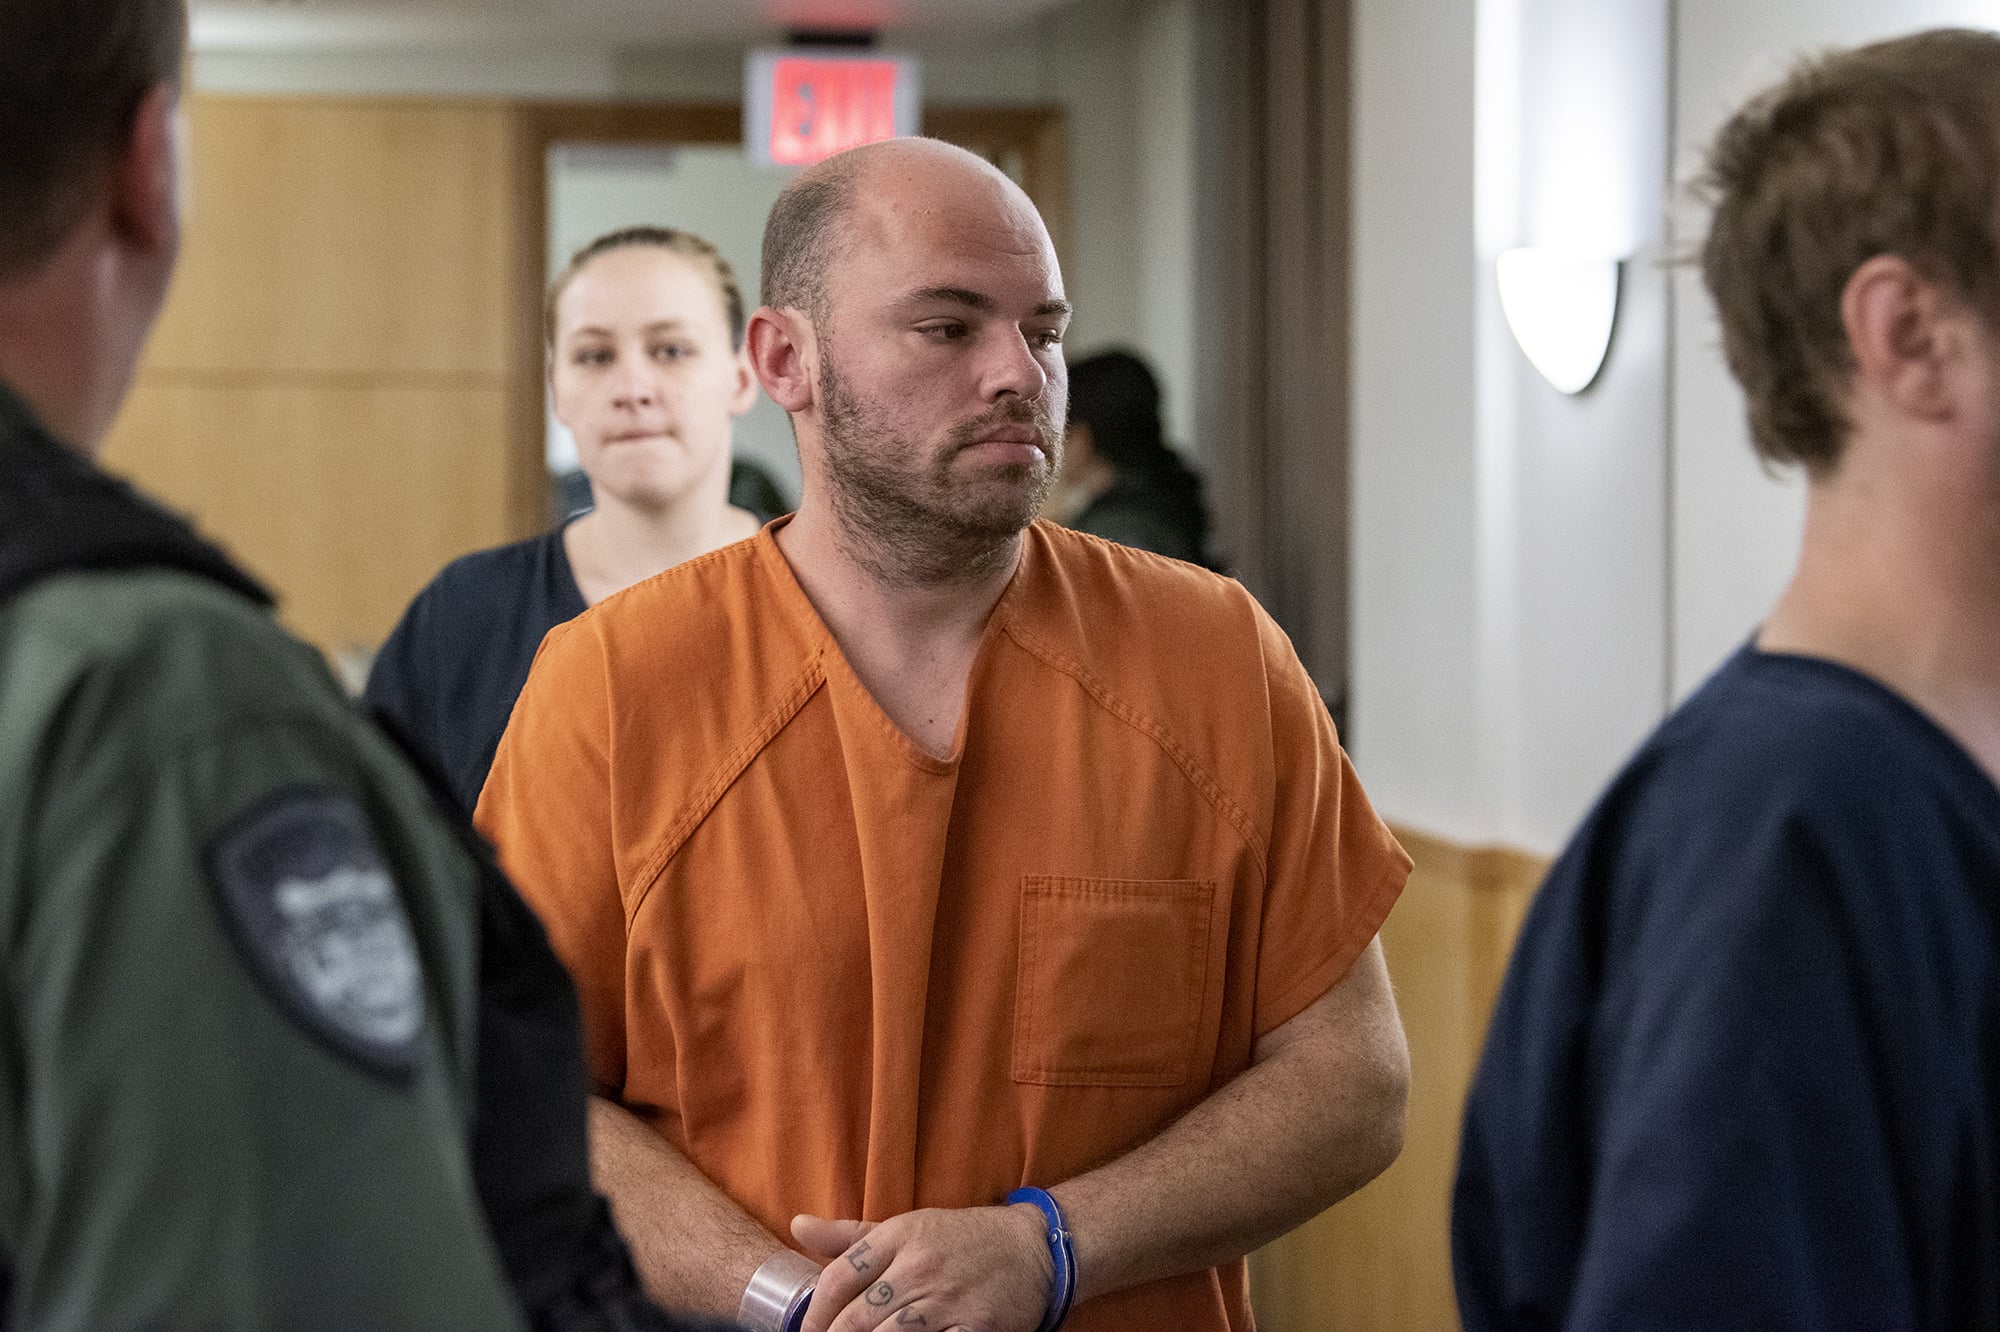 Anthony Lybeck, who is accused of hijacking a C-Tran bus and trying to force the driver to take him to Portland on Friday evening, made a first appearance this morning in Clark County Superior Court in Vancouver on Monday, April 22, 2019.